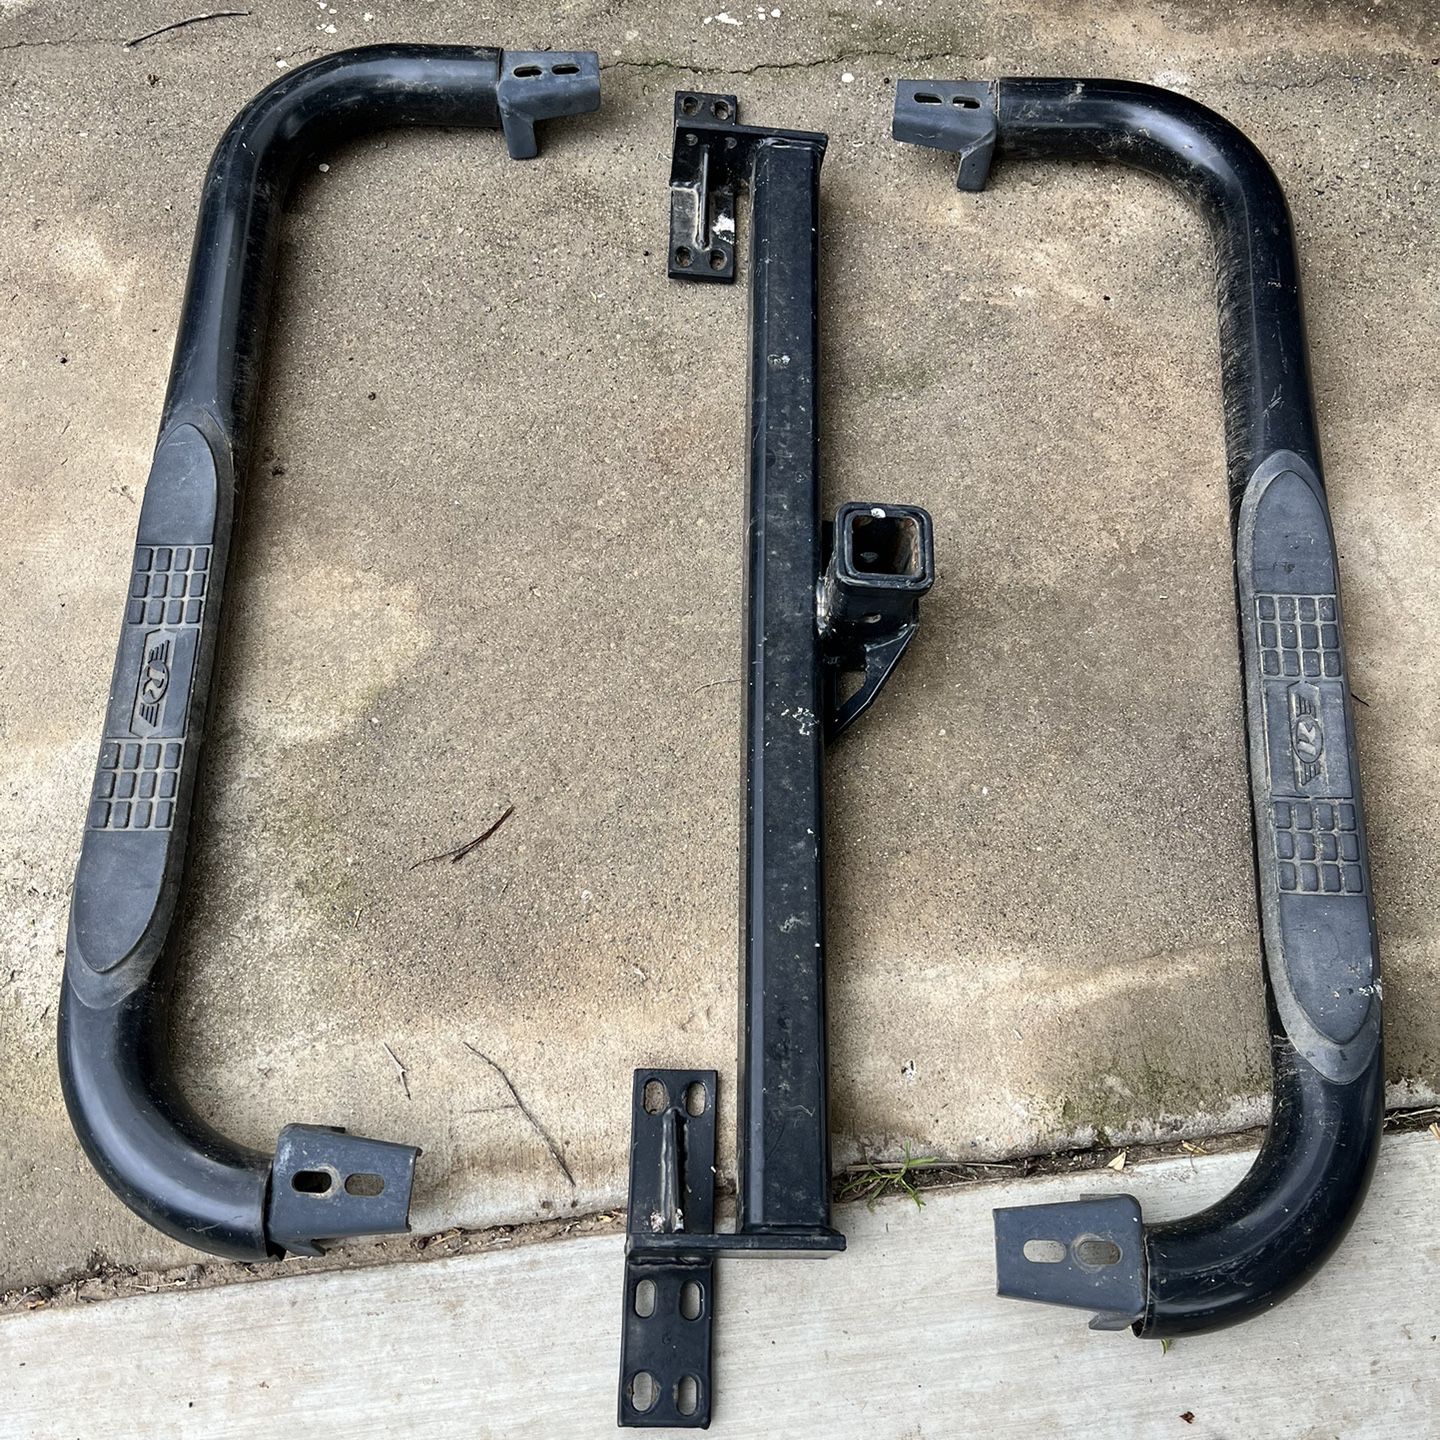 2000 Jeep Wrangler Tow hitch And Side Steps for Sale in Riverside County,  CA - OfferUp